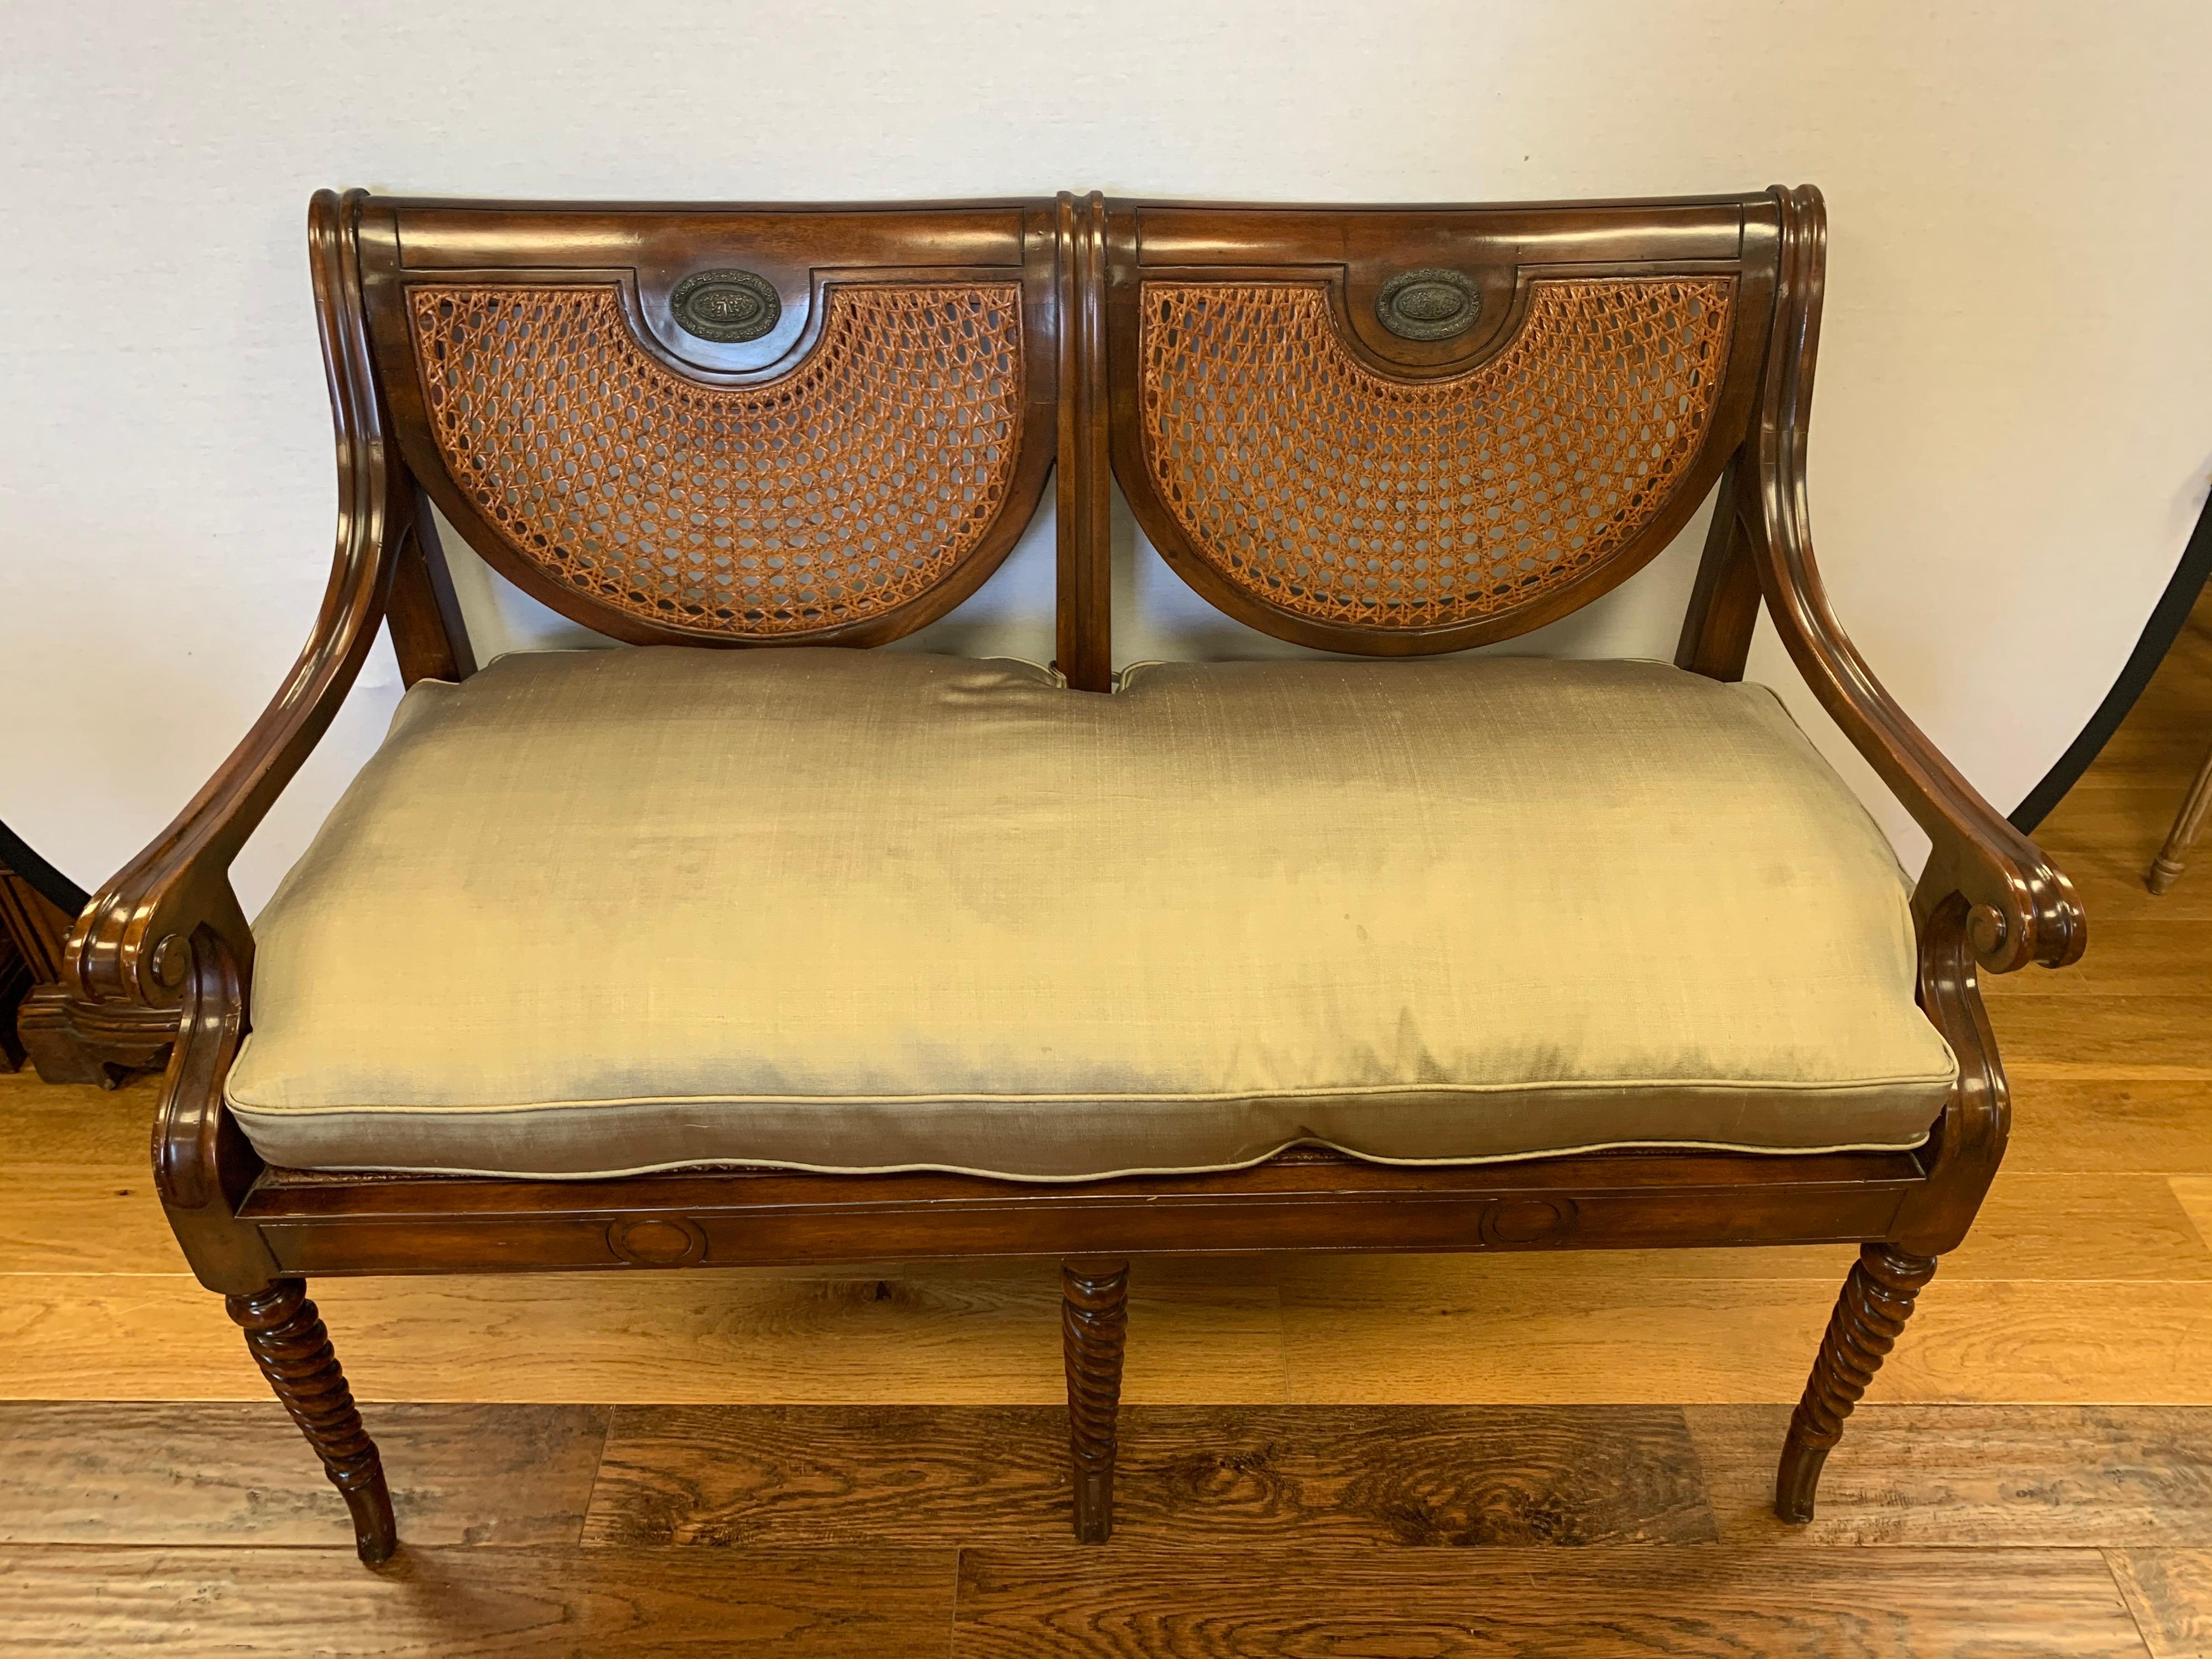 A Regency style mahogany double chair back settee or bench with caned back and seat with scroll arms. Removable down-filled gold silk seat cushion is included. Solid and sturdy throughout.
Measures: 17.75” seat without cushion, 22” with cushion.